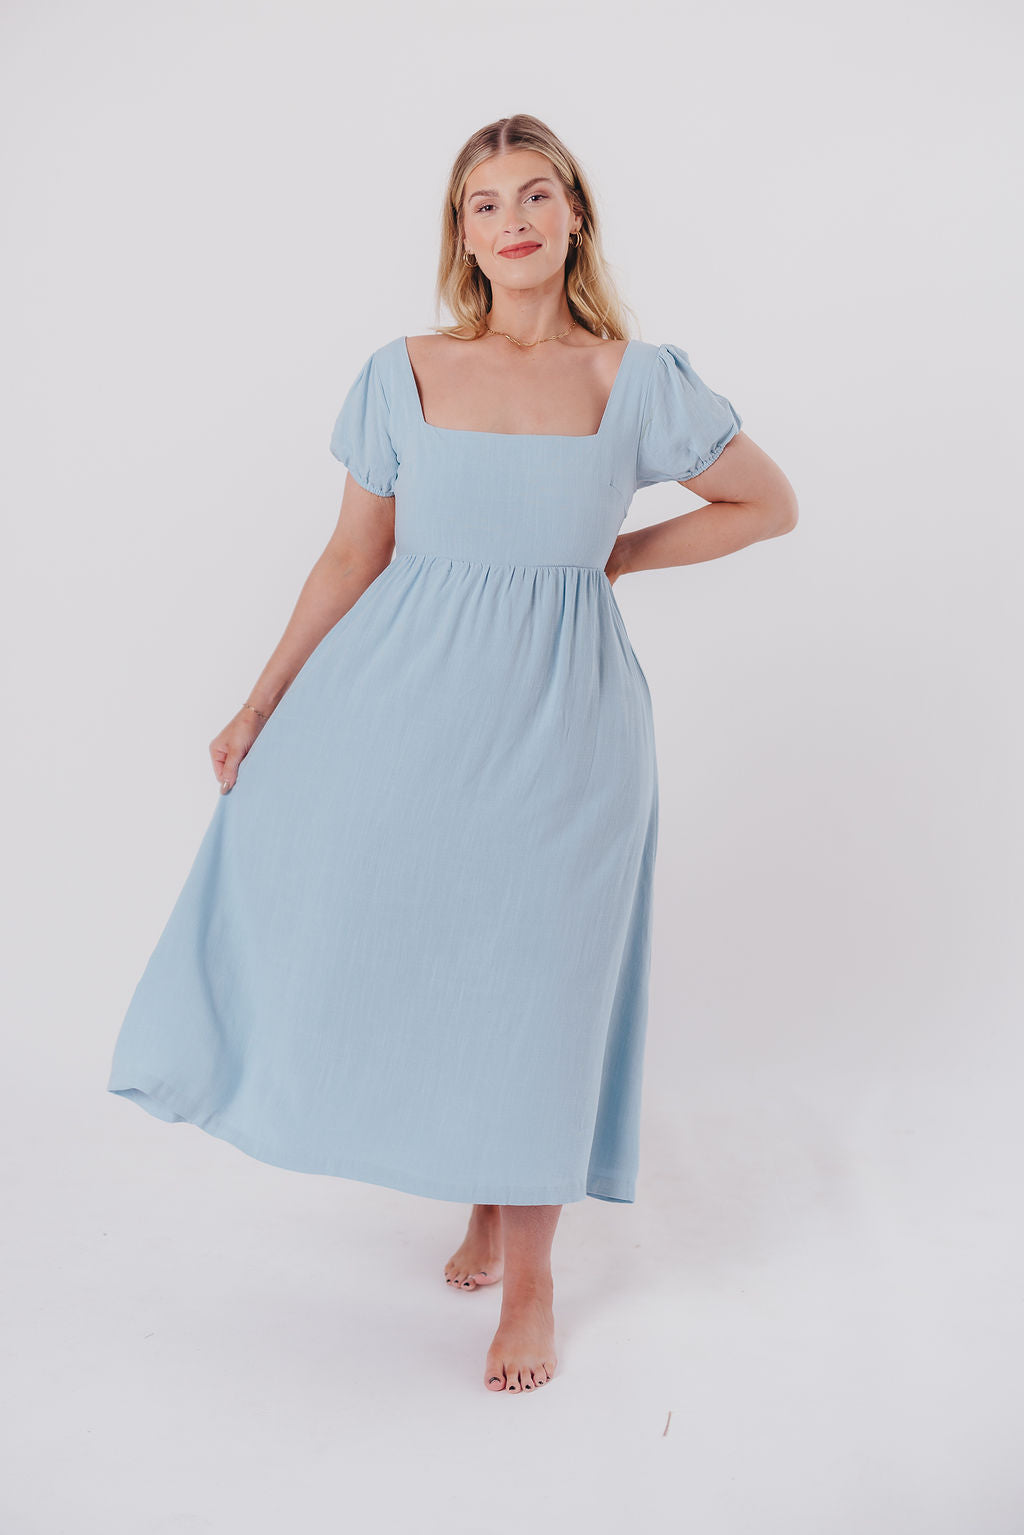 Ainsley Square Neck Midi Dress with Puffed Sleeves in Baby Blue - Bump Friendly & Inclusive Sizing (S-3XL)